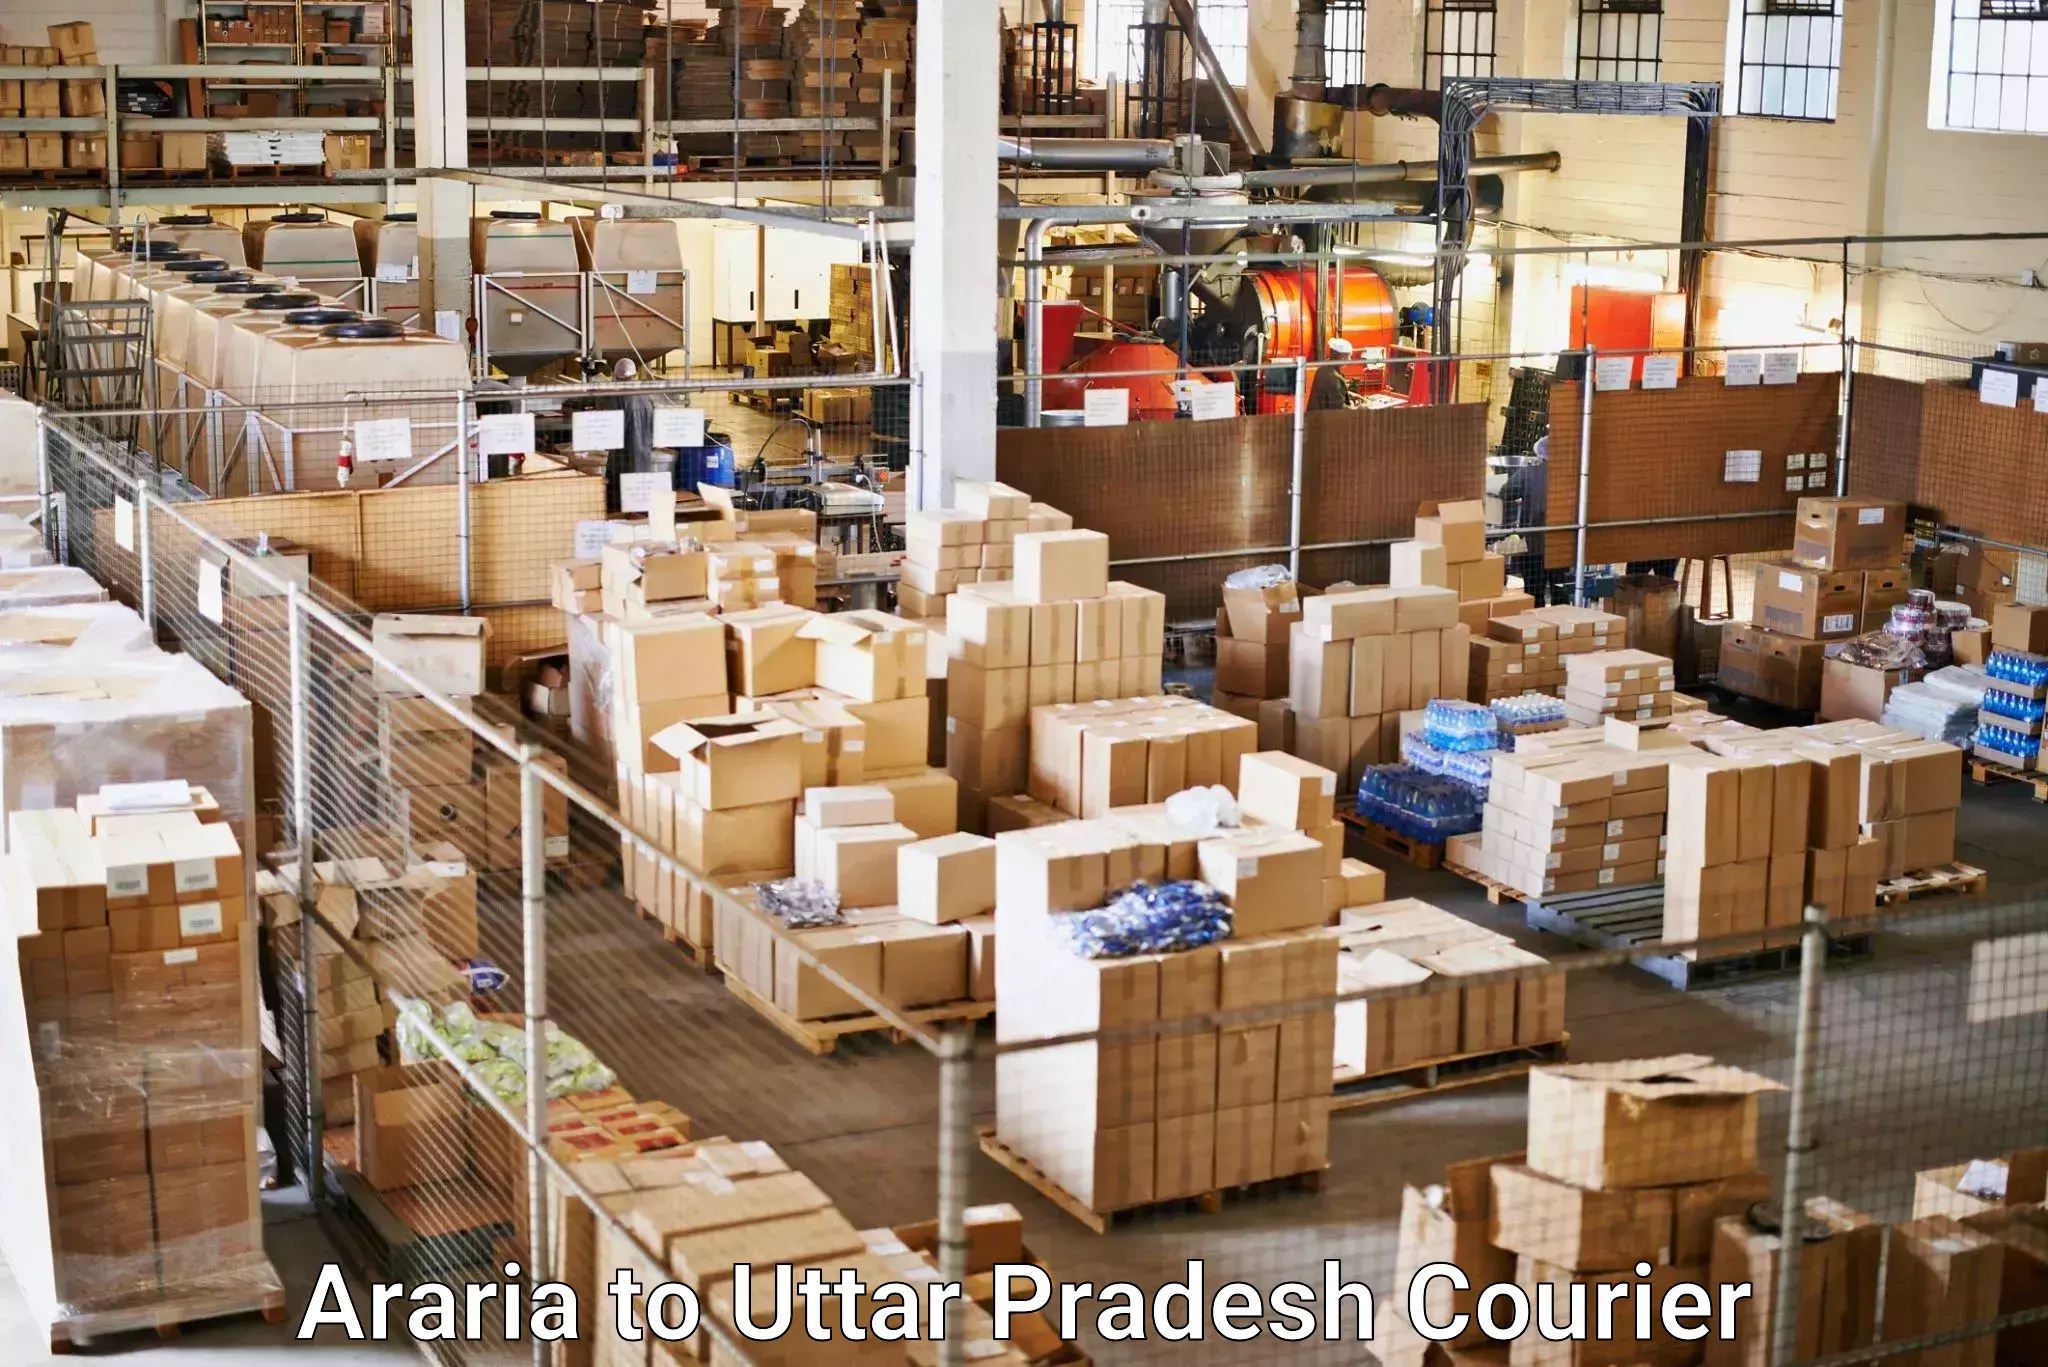 State-of-the-art courier technology Araria to Uttar Pradesh